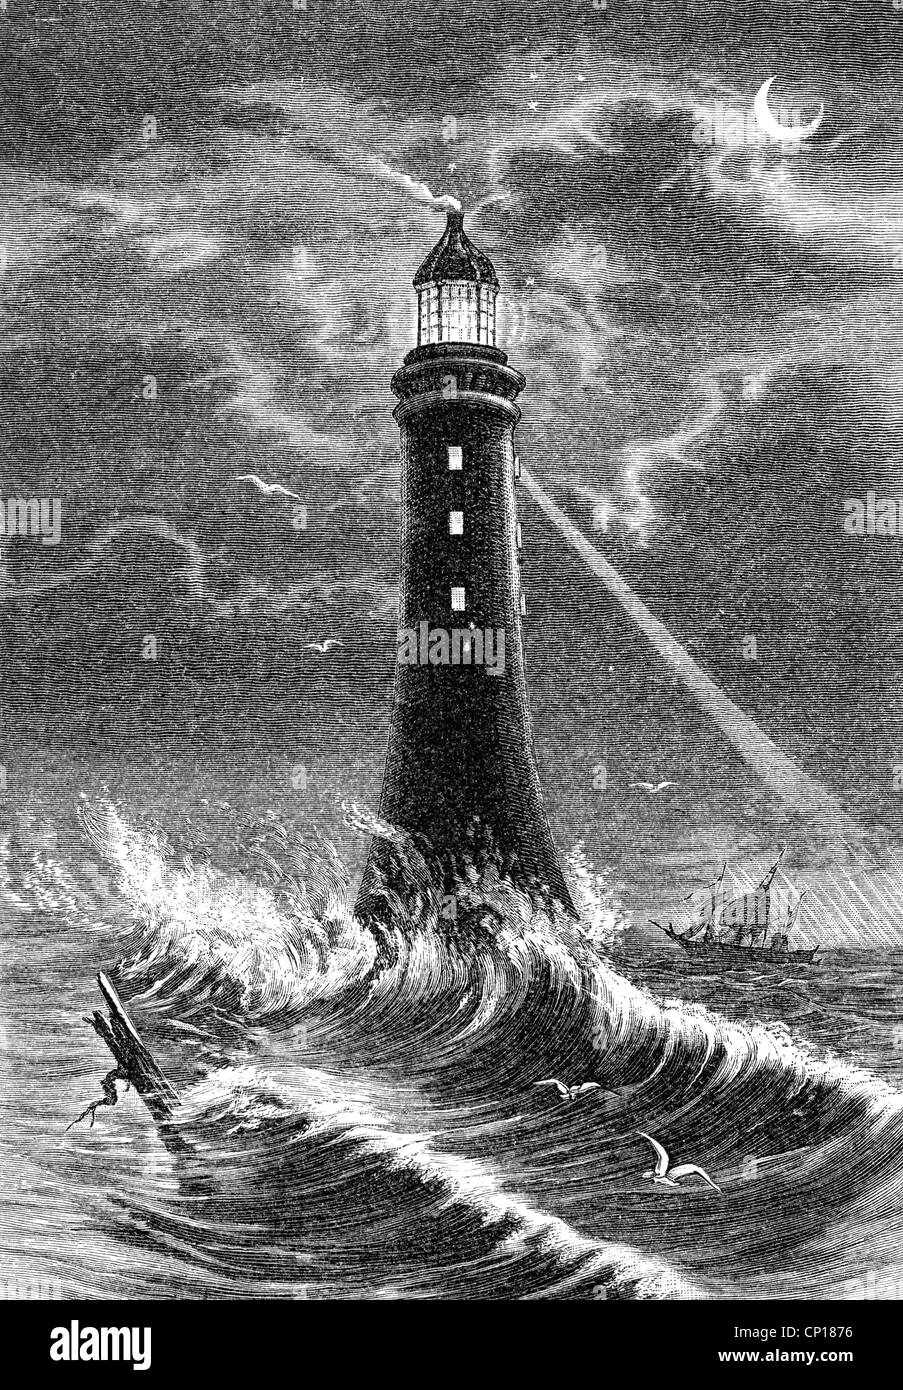 transport / transportation, navigation, Eddystone lighthouse, Devon, England, wood engraving, 19th century, storm, weather, ship, wind, Eddystone Rocks, Devon, England,English Channel, sea, bonfire, light, lights, technics, georgraphy, Western Europe, Great Britian, historic, historical, Additional-Rights-Clearences-Not Available Stock Photo